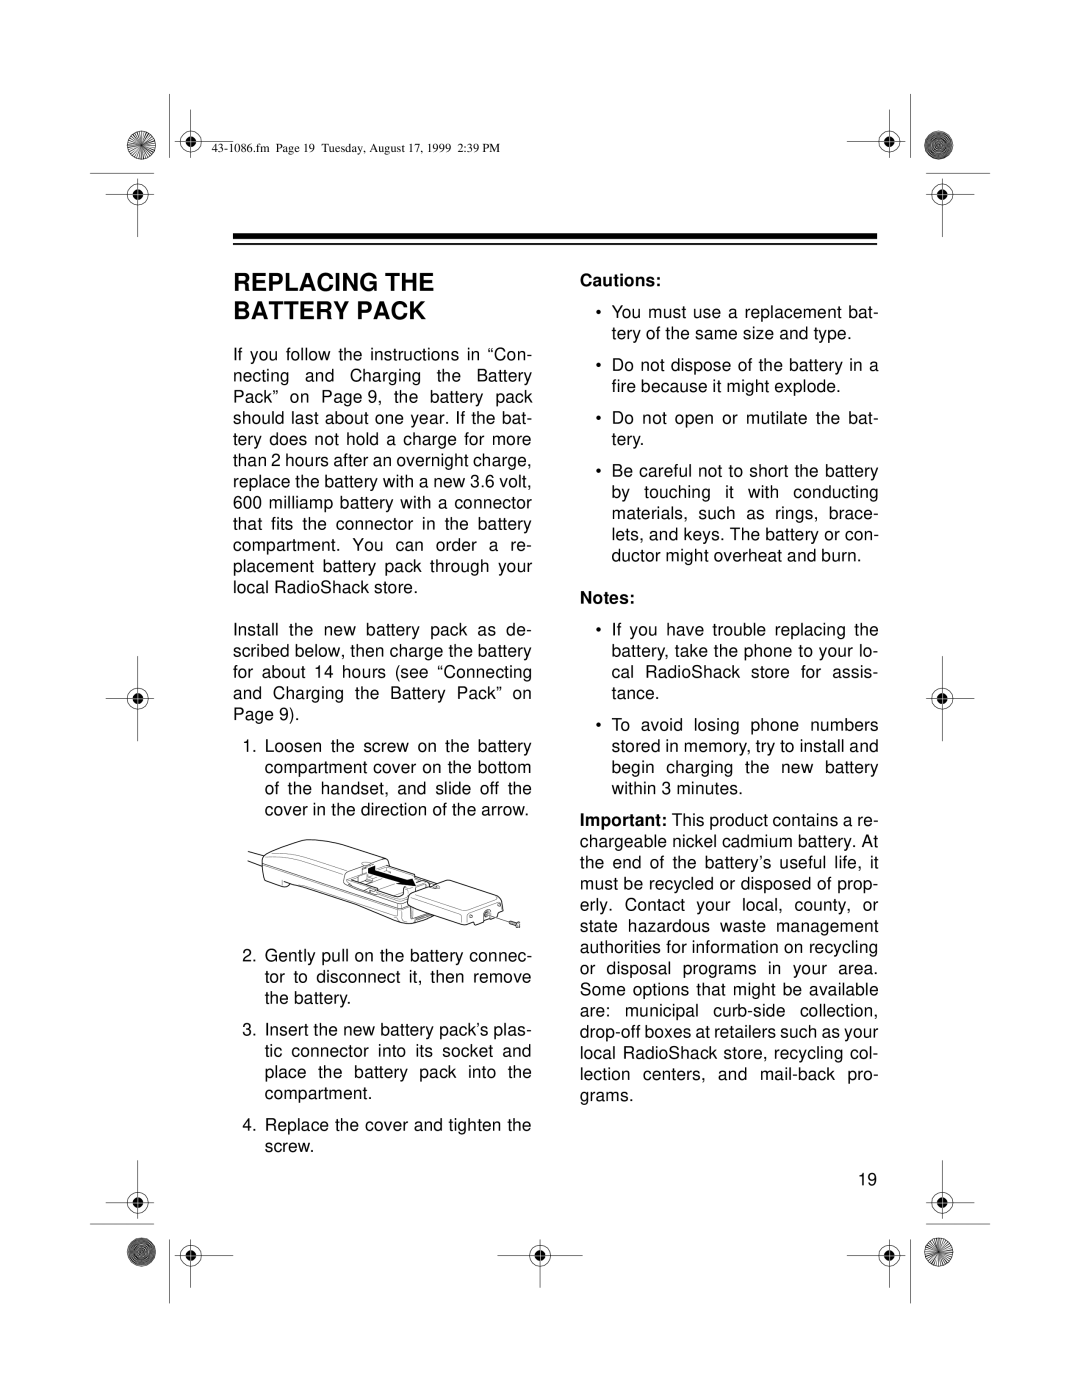 Radio Shack ET-916 owner manual Replacing The Battery Pack, Cautions 